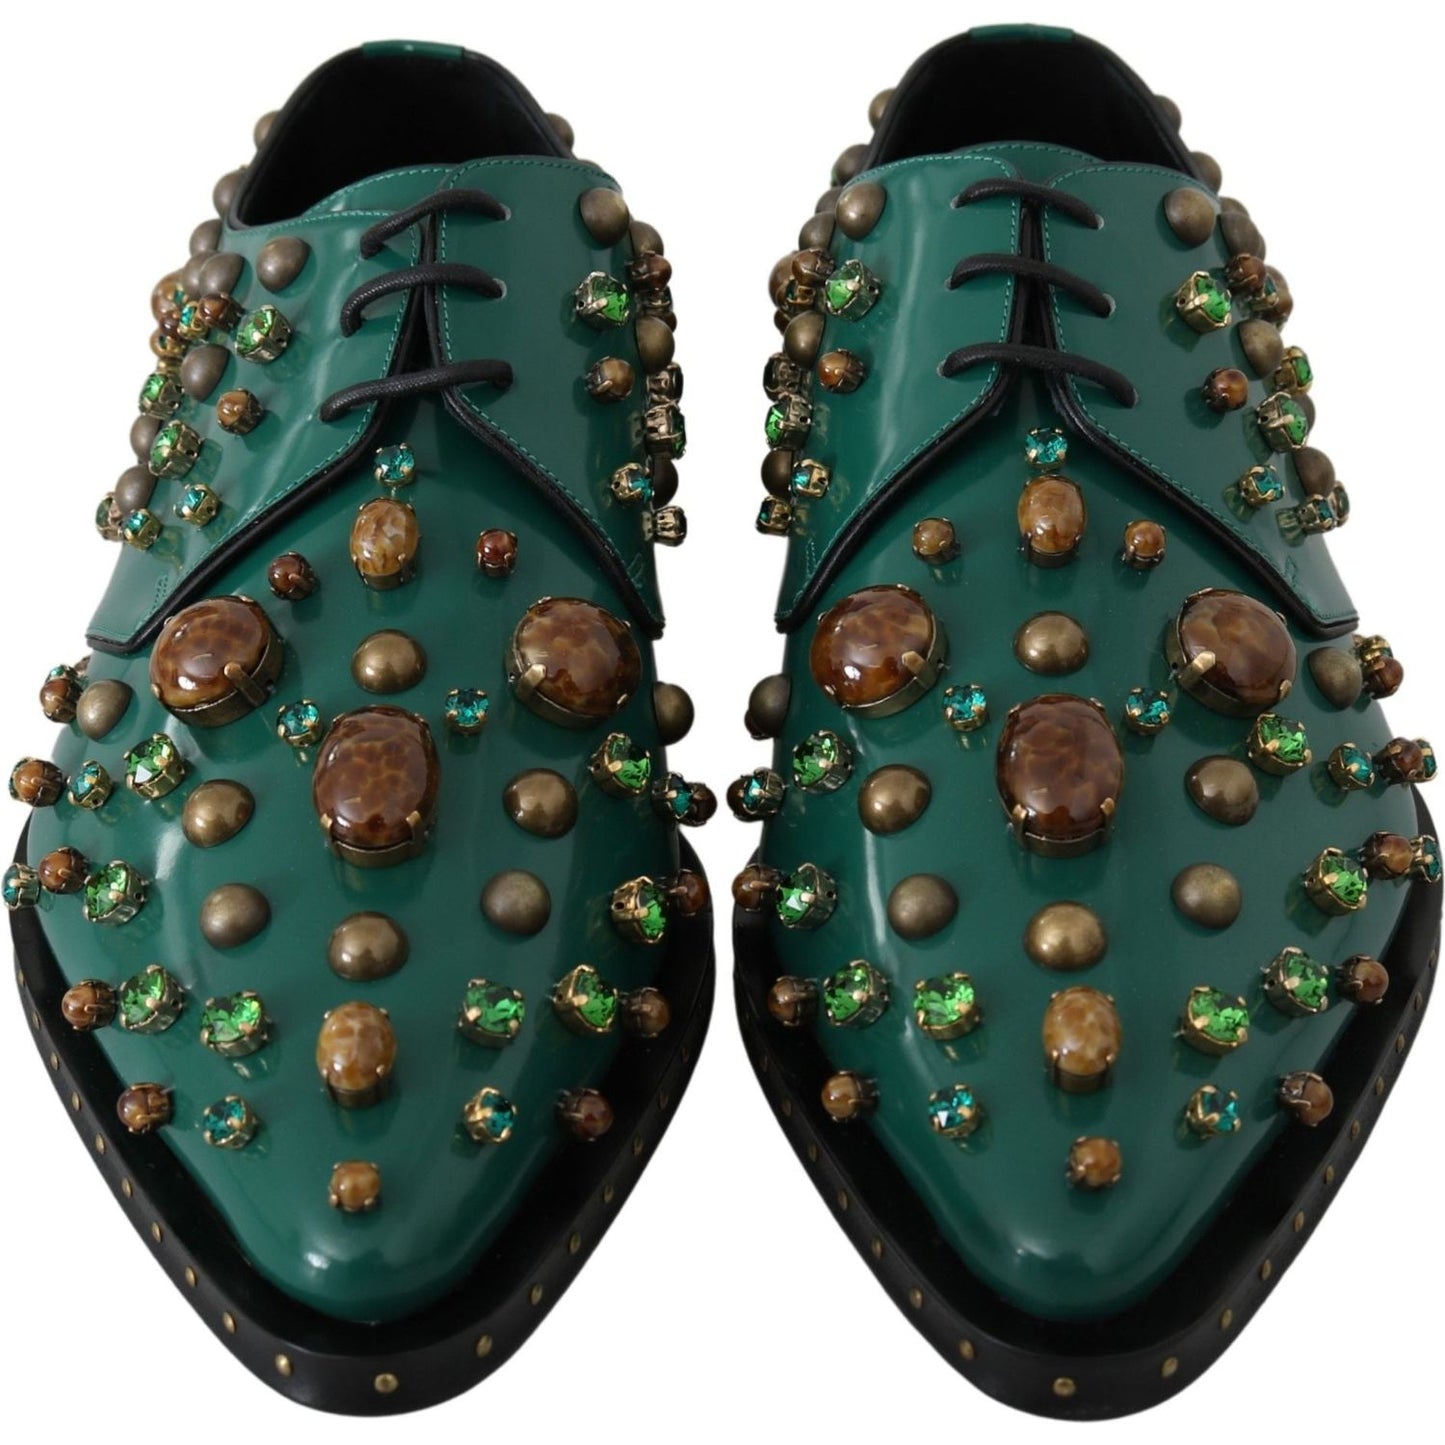 Dolce & Gabbana Emerald Leather Dress Shoes with Crystal Accents green-leather-crystal-dress-broque-shoes IMG_1563-8b03a760-538.jpg